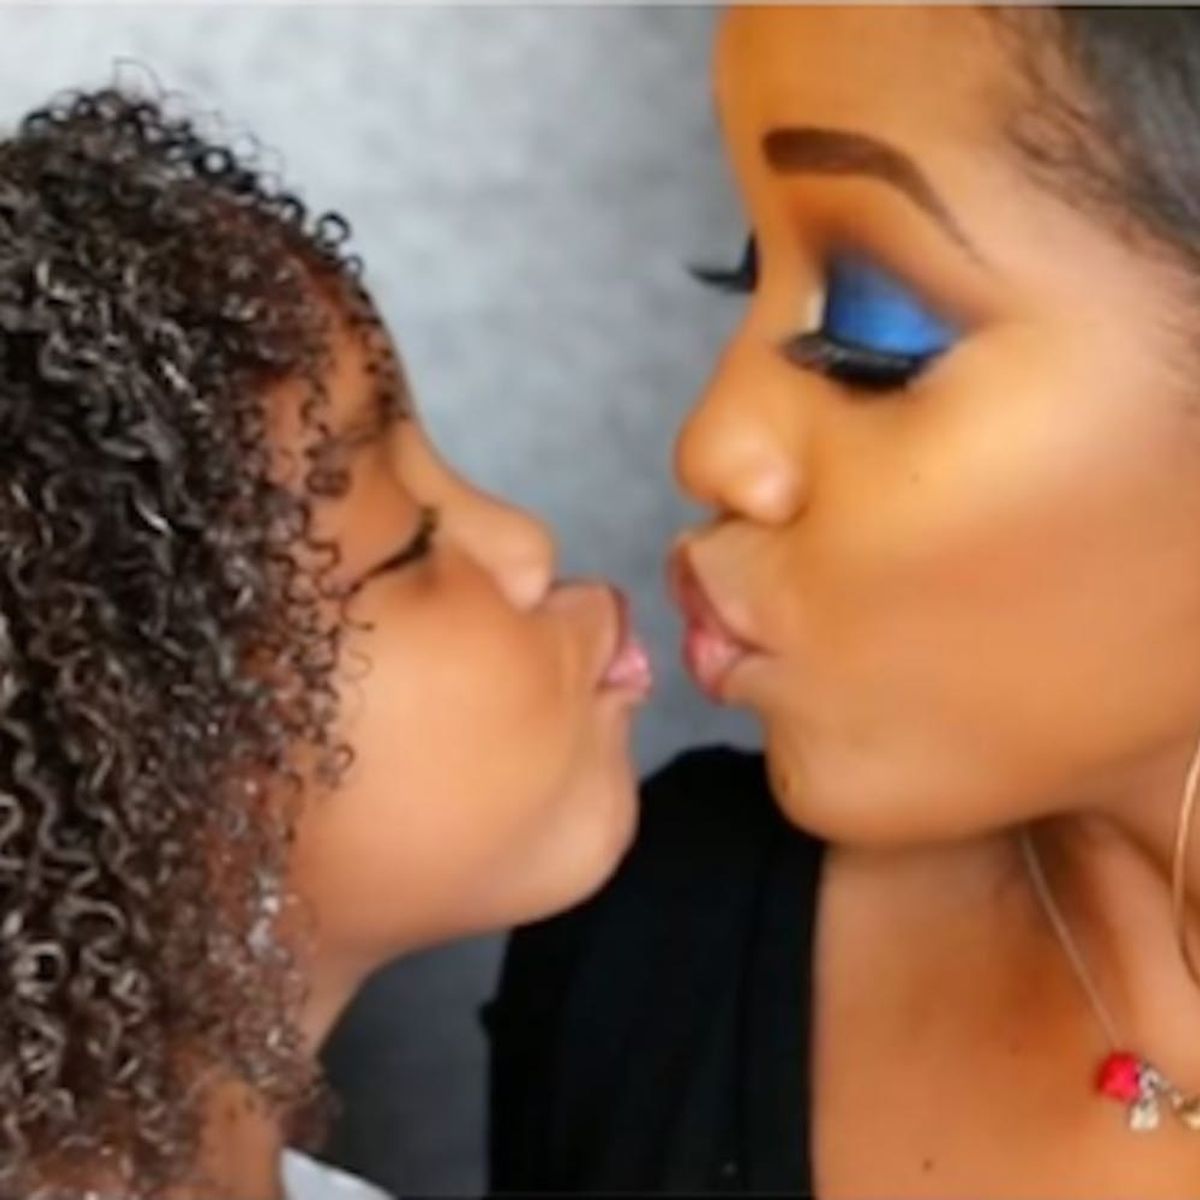 This 5-Year-Old Narrating Her Mom’s Beauty Tutorial Is the Cutest Thing Ever